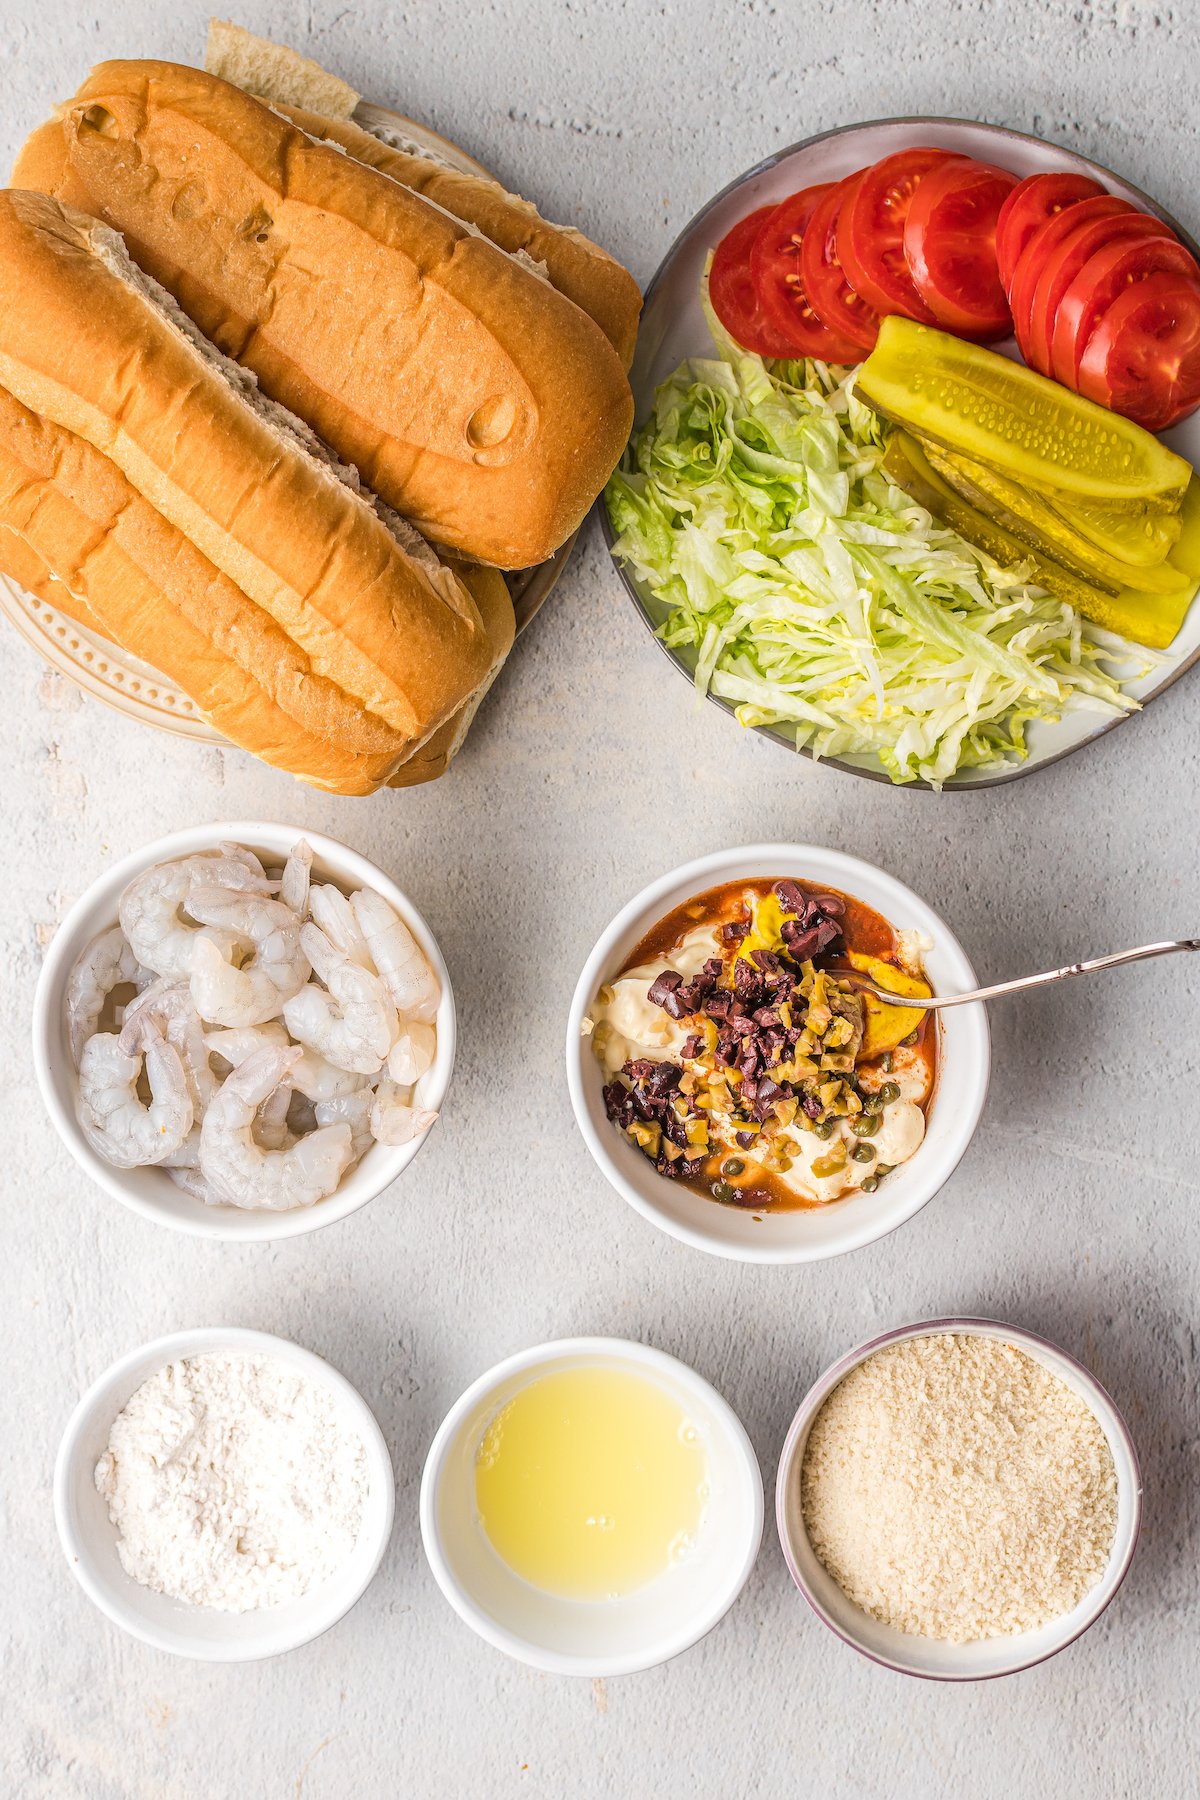 From top left: Sandwich buns, lettuce, tomato slices, pickle slices, raw shrimp, a bowl with remoulade ingredients and a spoon, and three bowls of flour, egg whites, and panko.